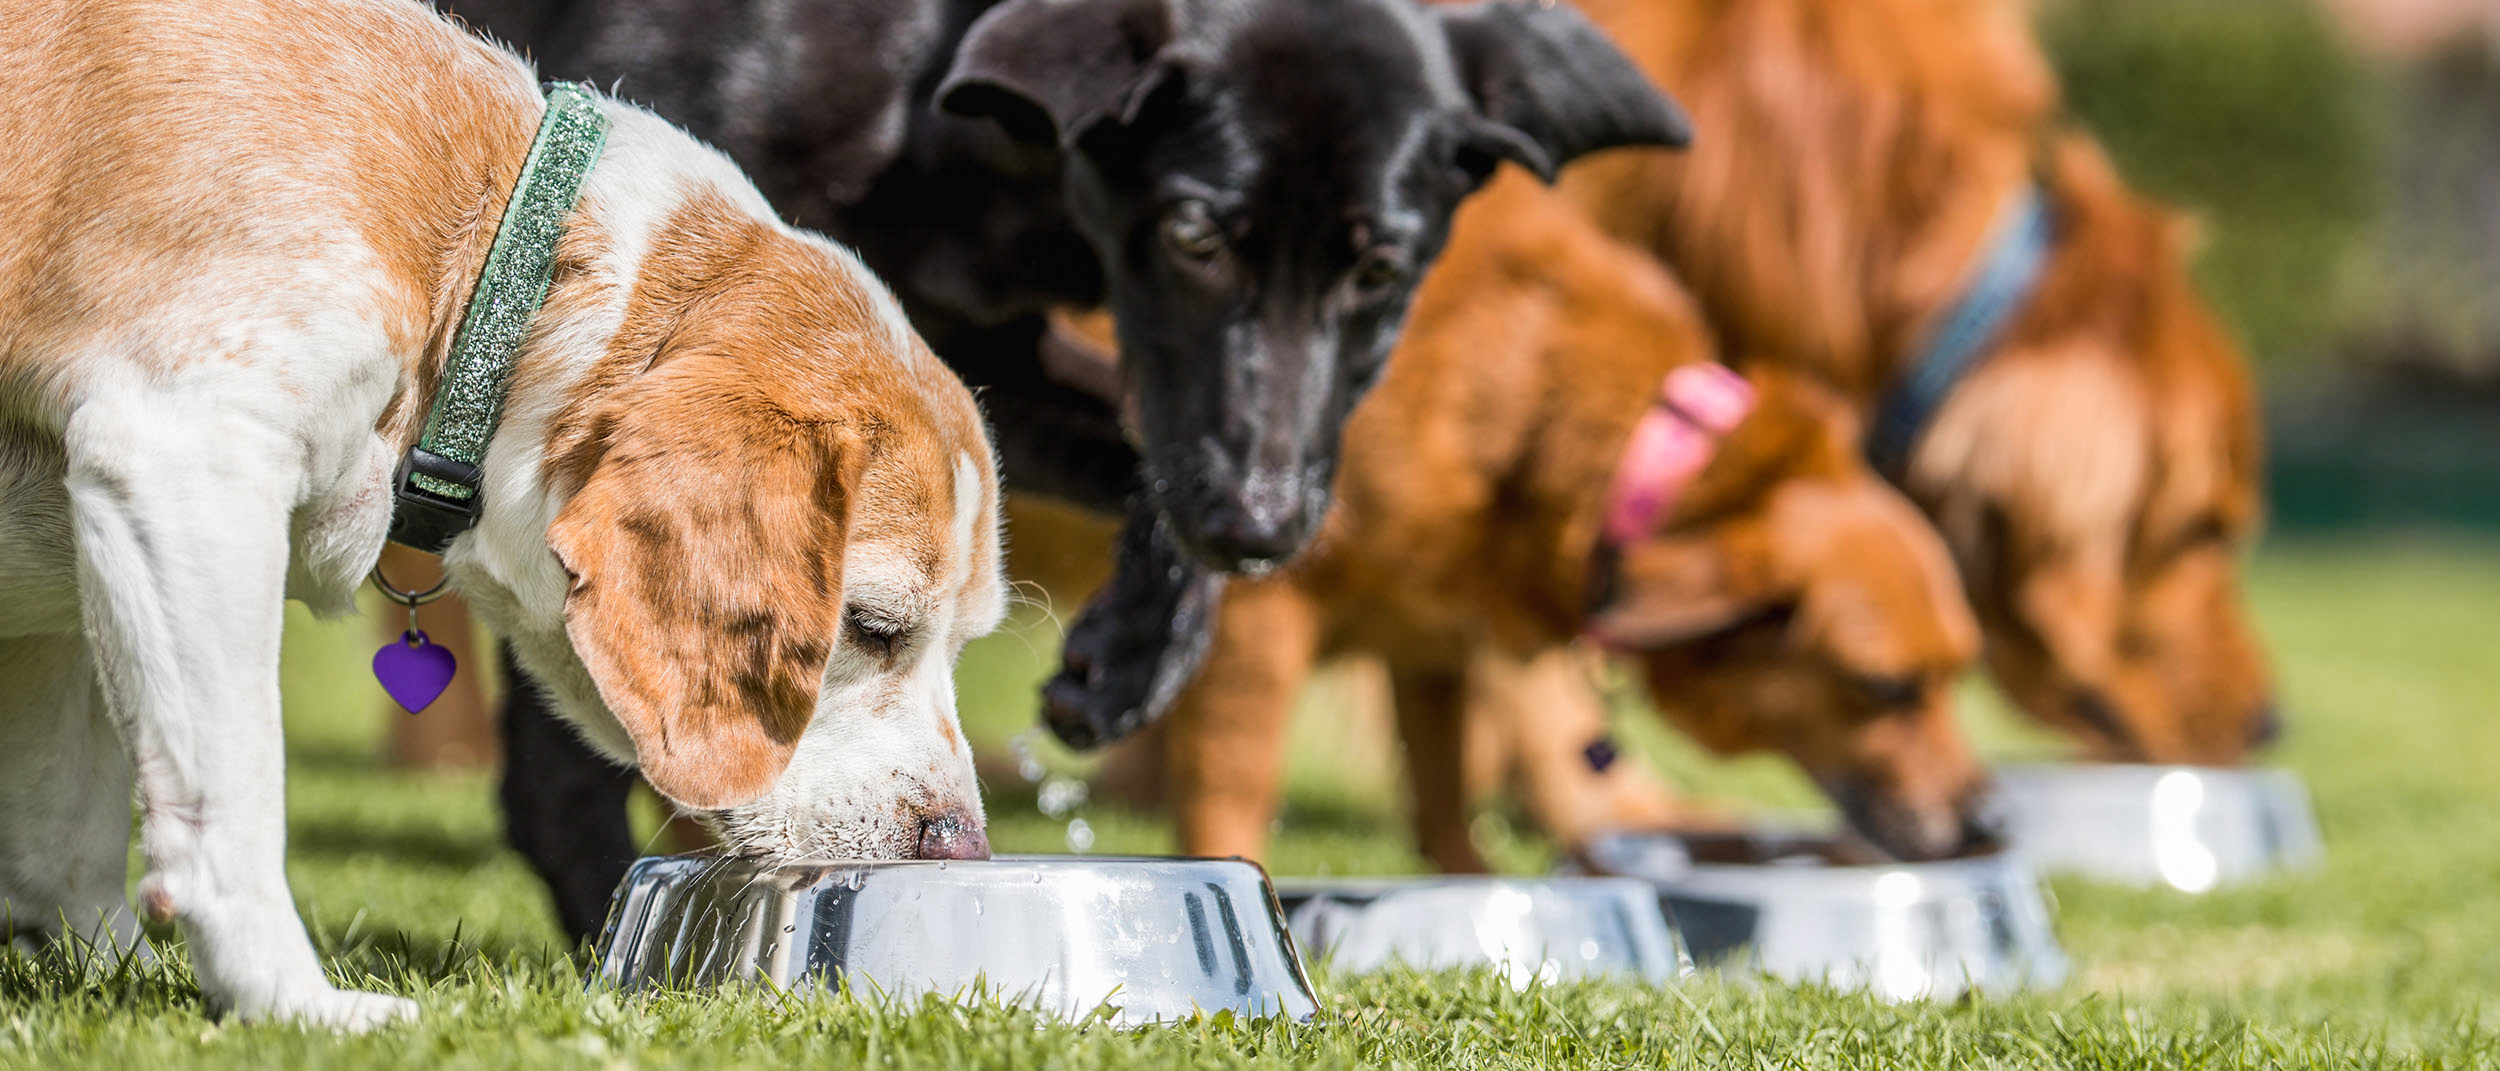 Adult dogs standing outdoors eating from silver bowls.